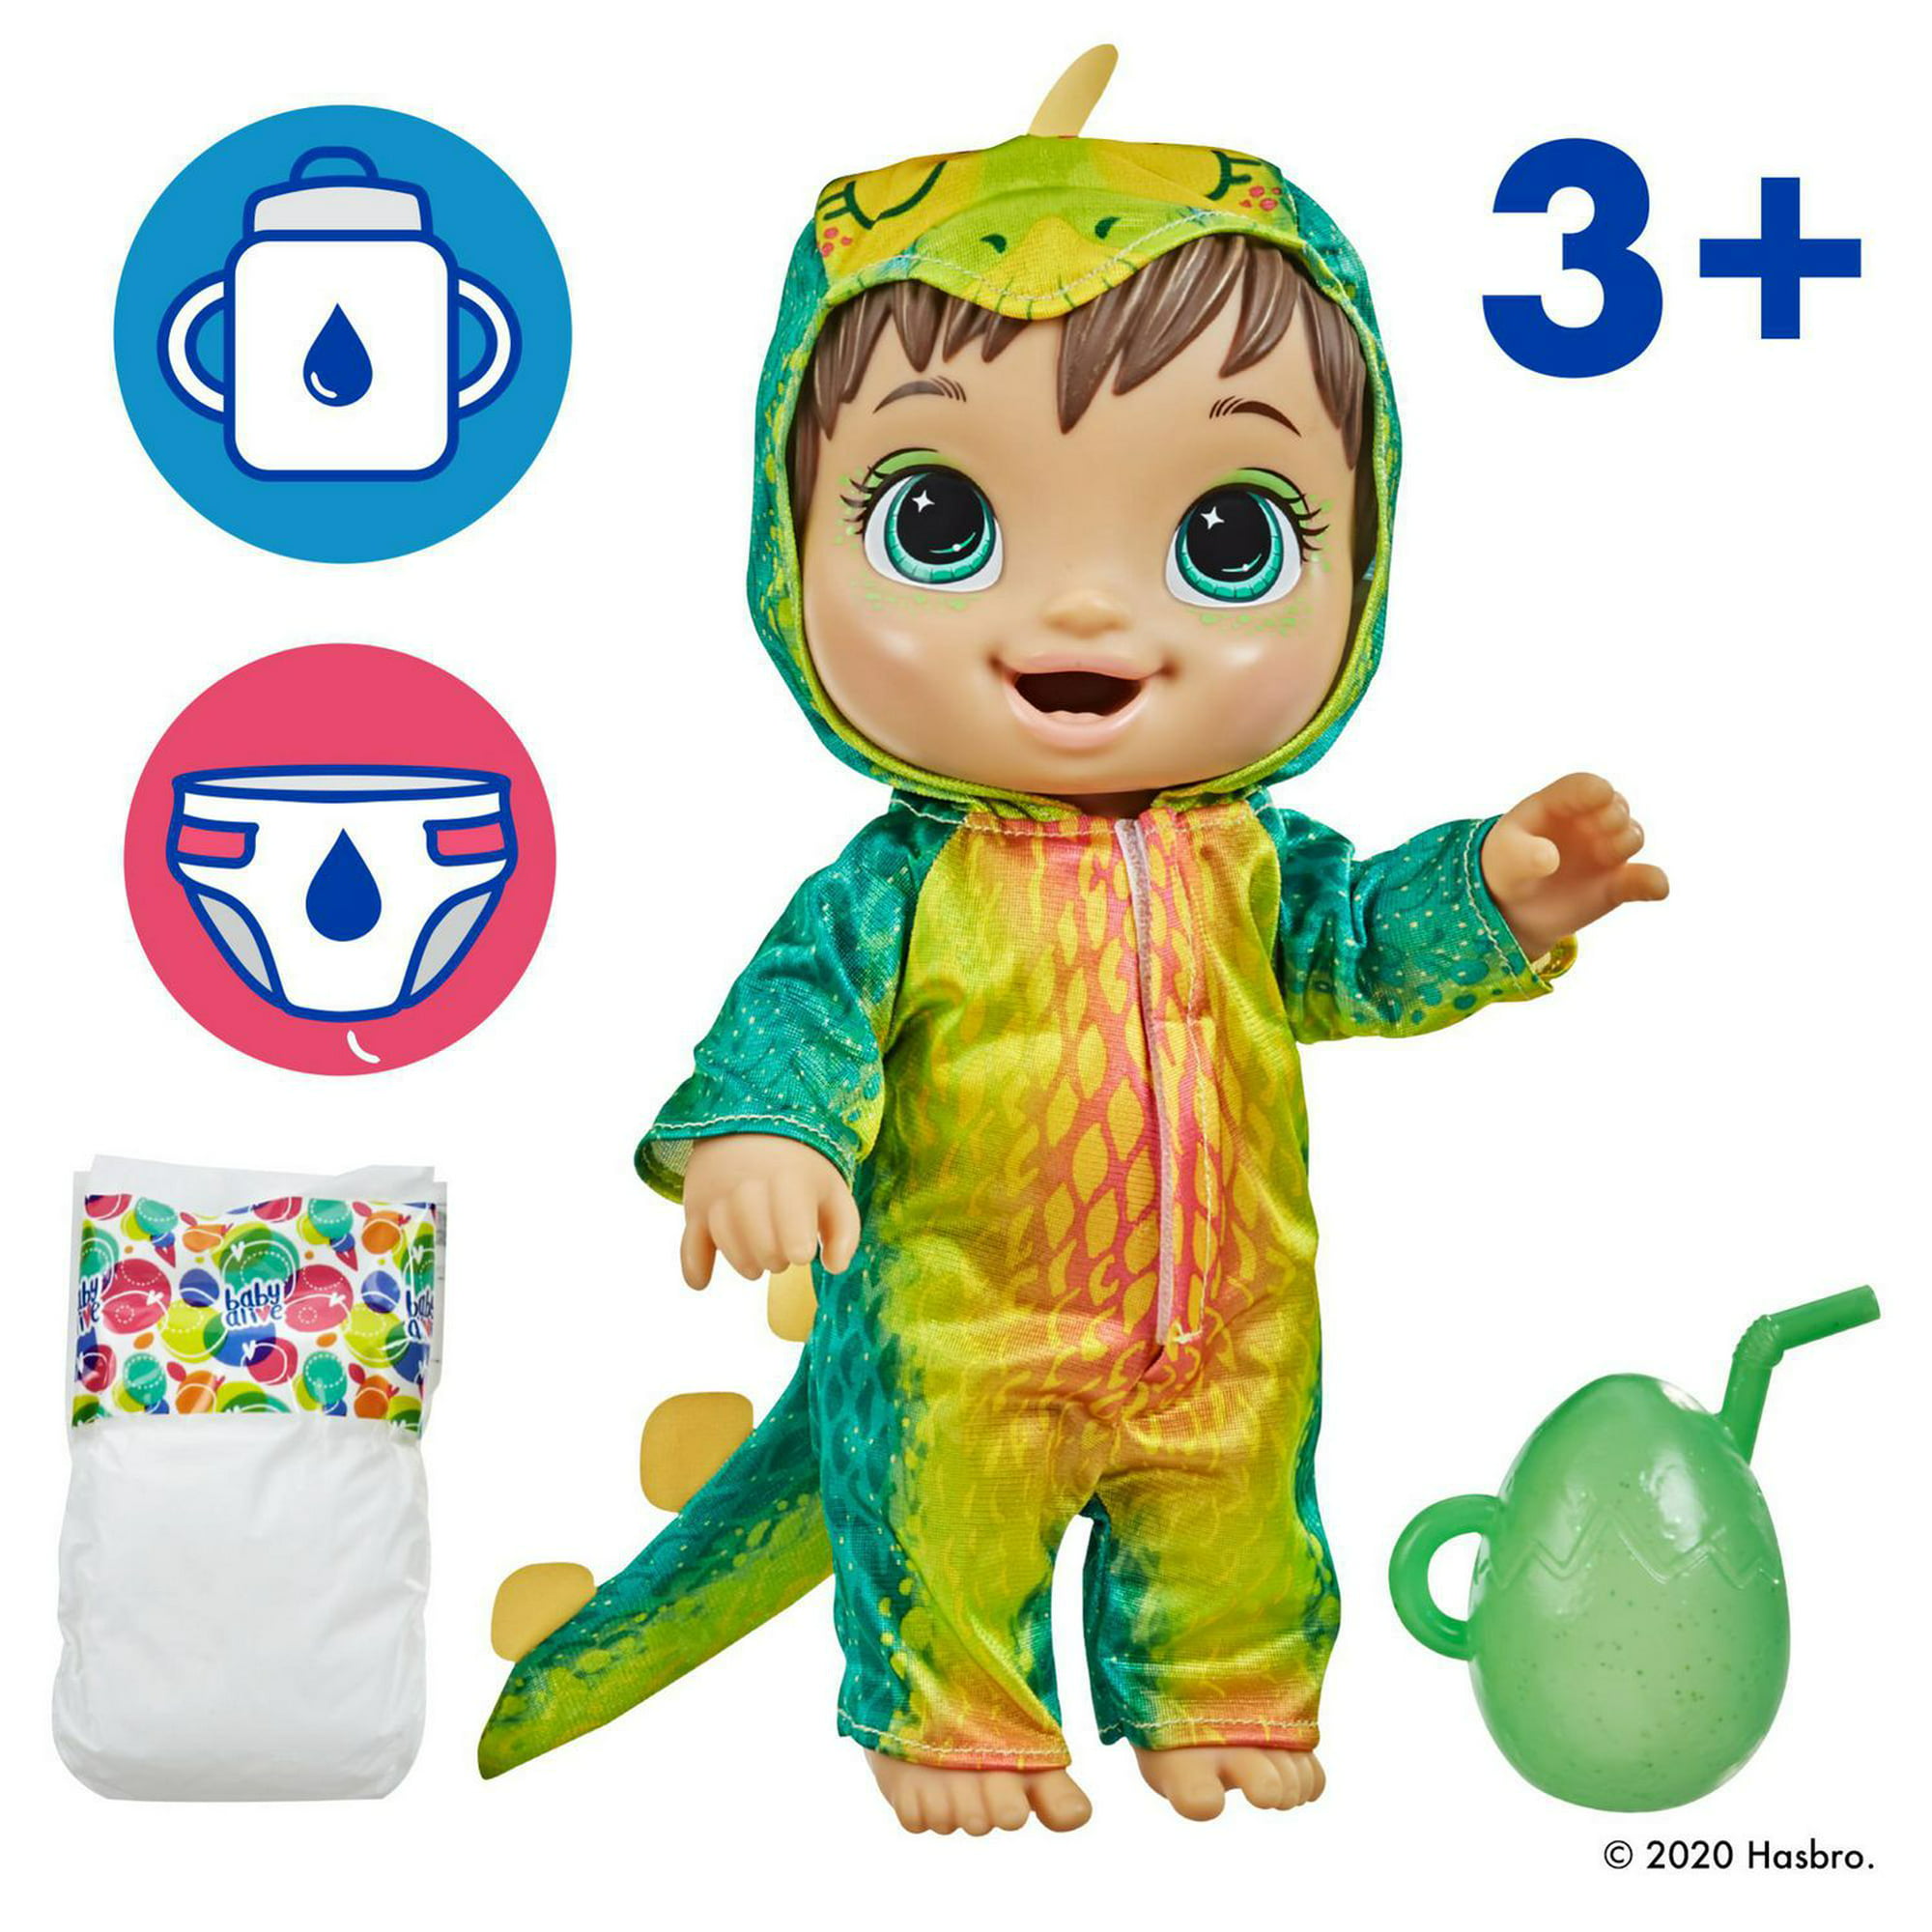 Baby Alive Sunshine Love Doll, Dinosaur Towel, 10-Inch Waterplay Baby Doll,  Sunglasses, Blonde Hair Toy for Kids 3 and Up - Baby Alive